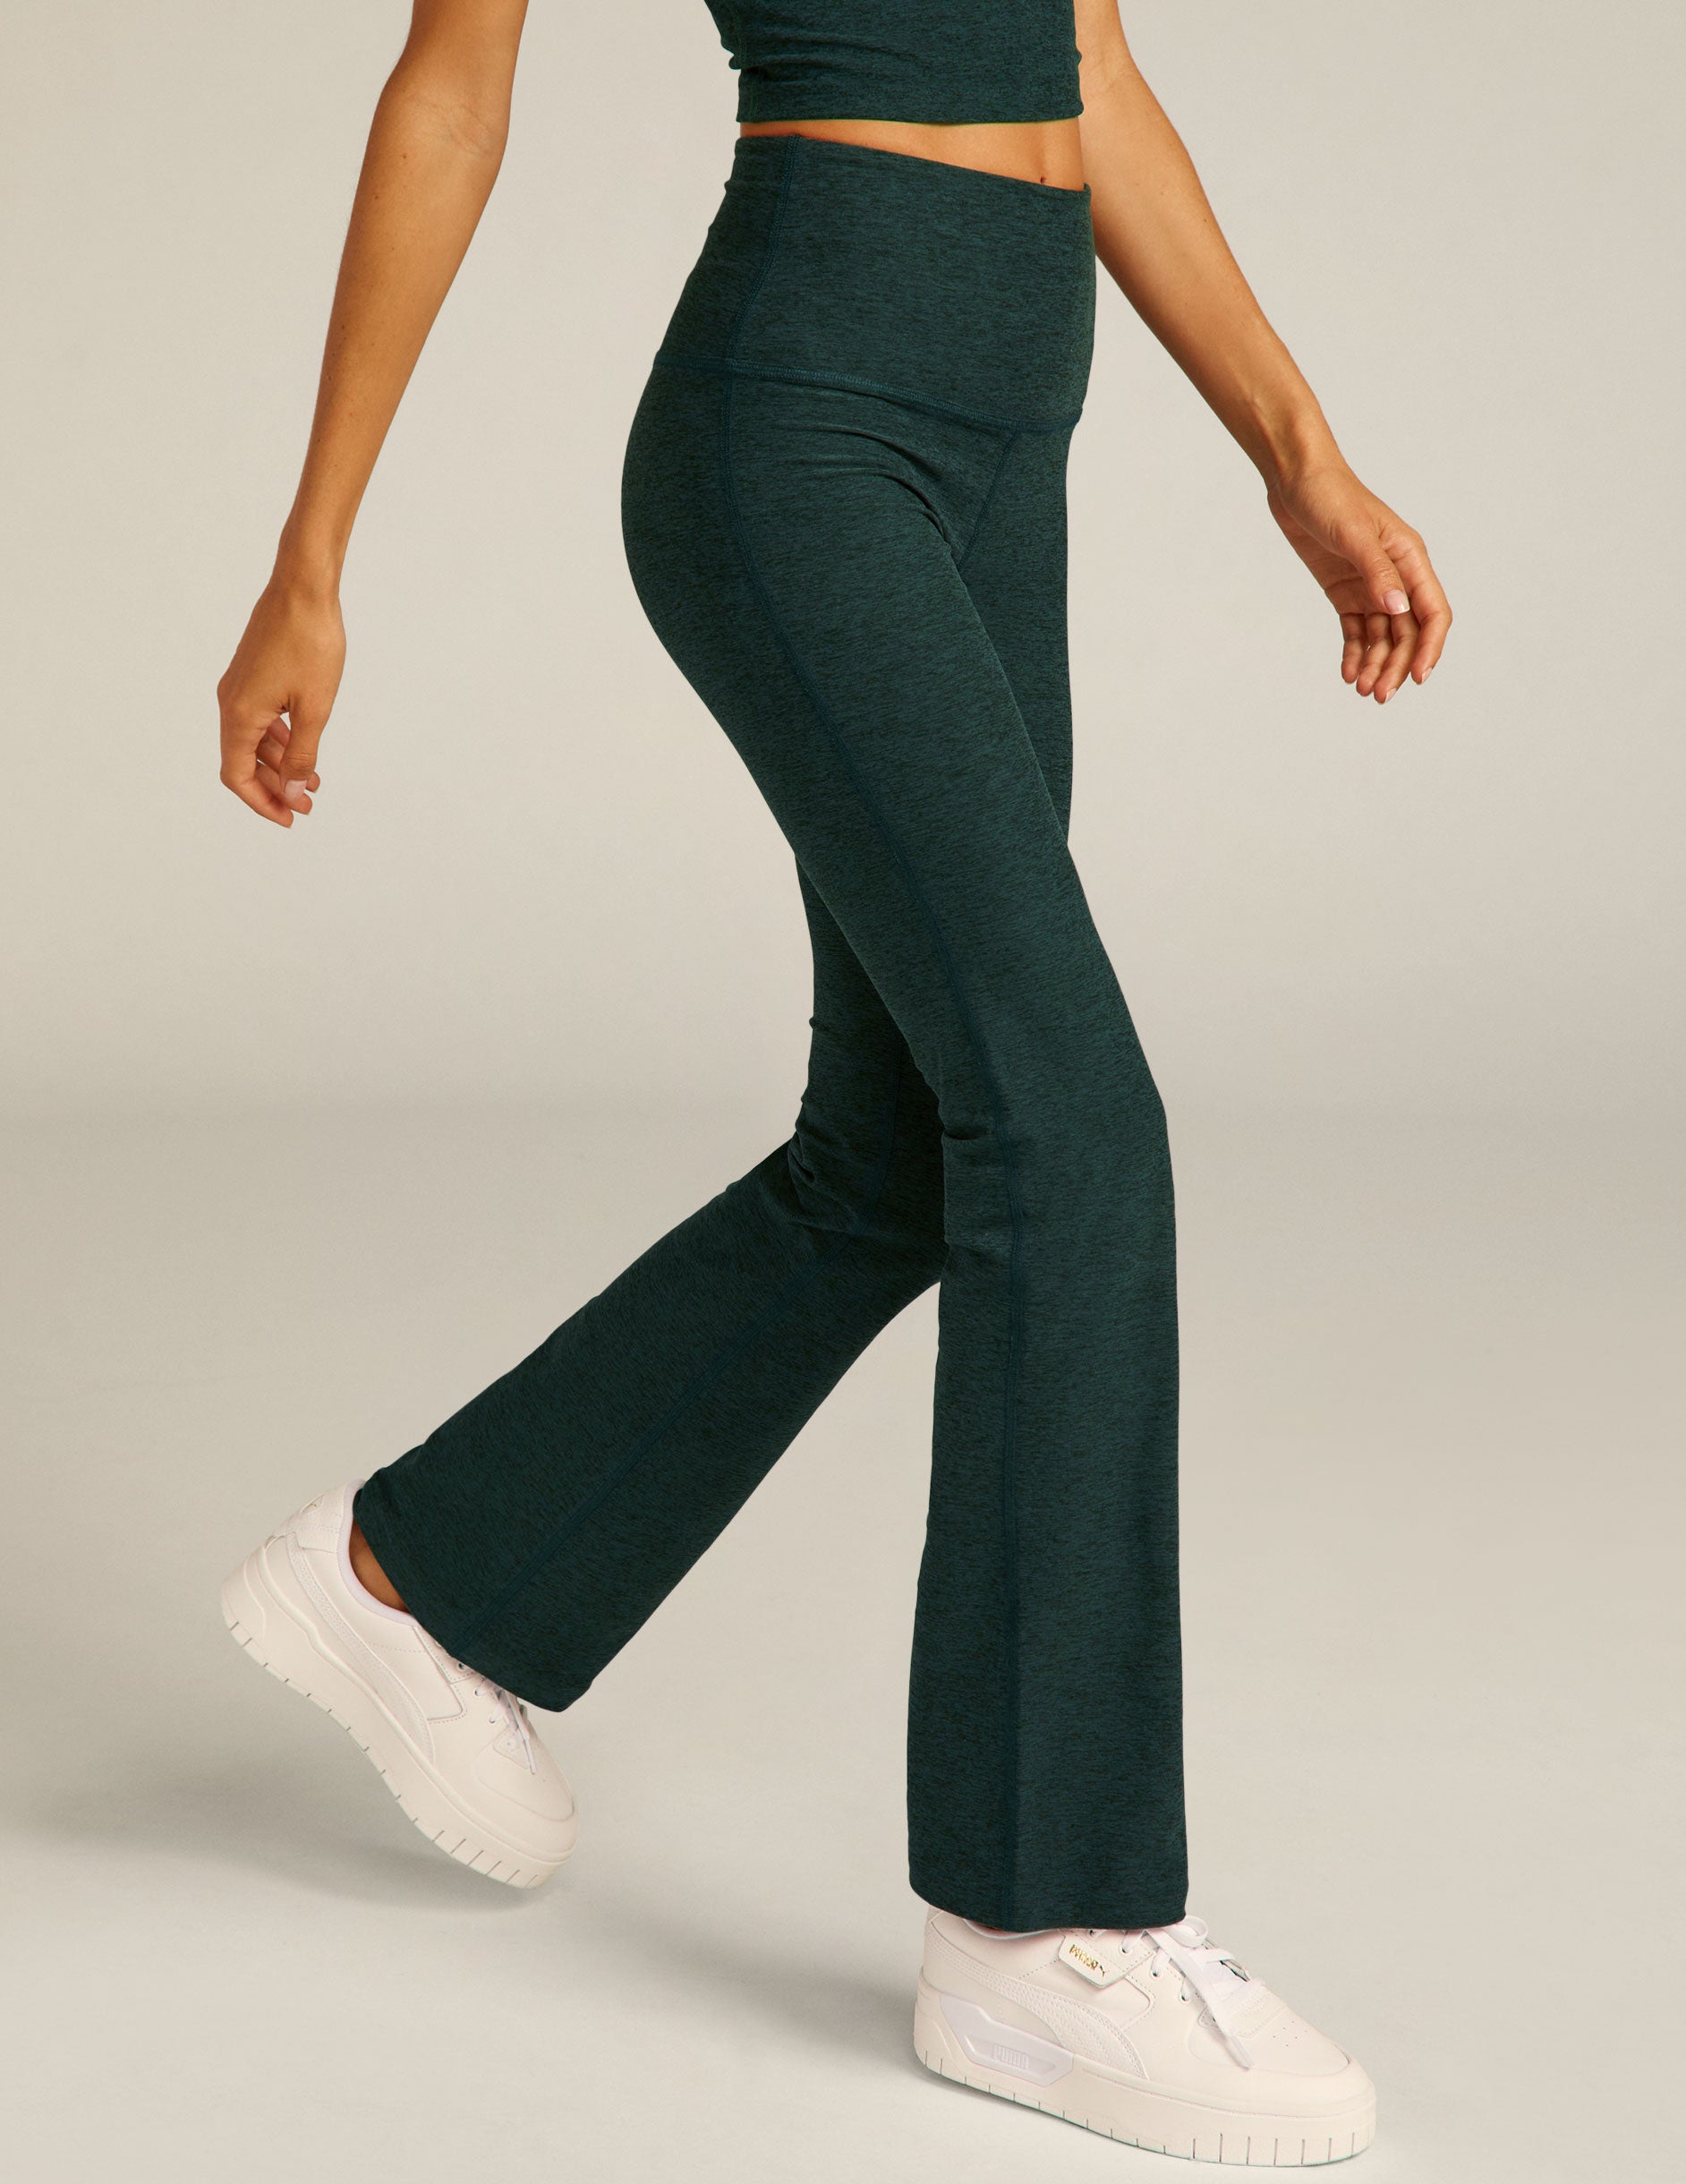 Best Thick Flared Leggings: Beyond Yoga Spacedye High Waisted Practice Pant, Flared Leggings Are Back, and These are Our 8 Favourites